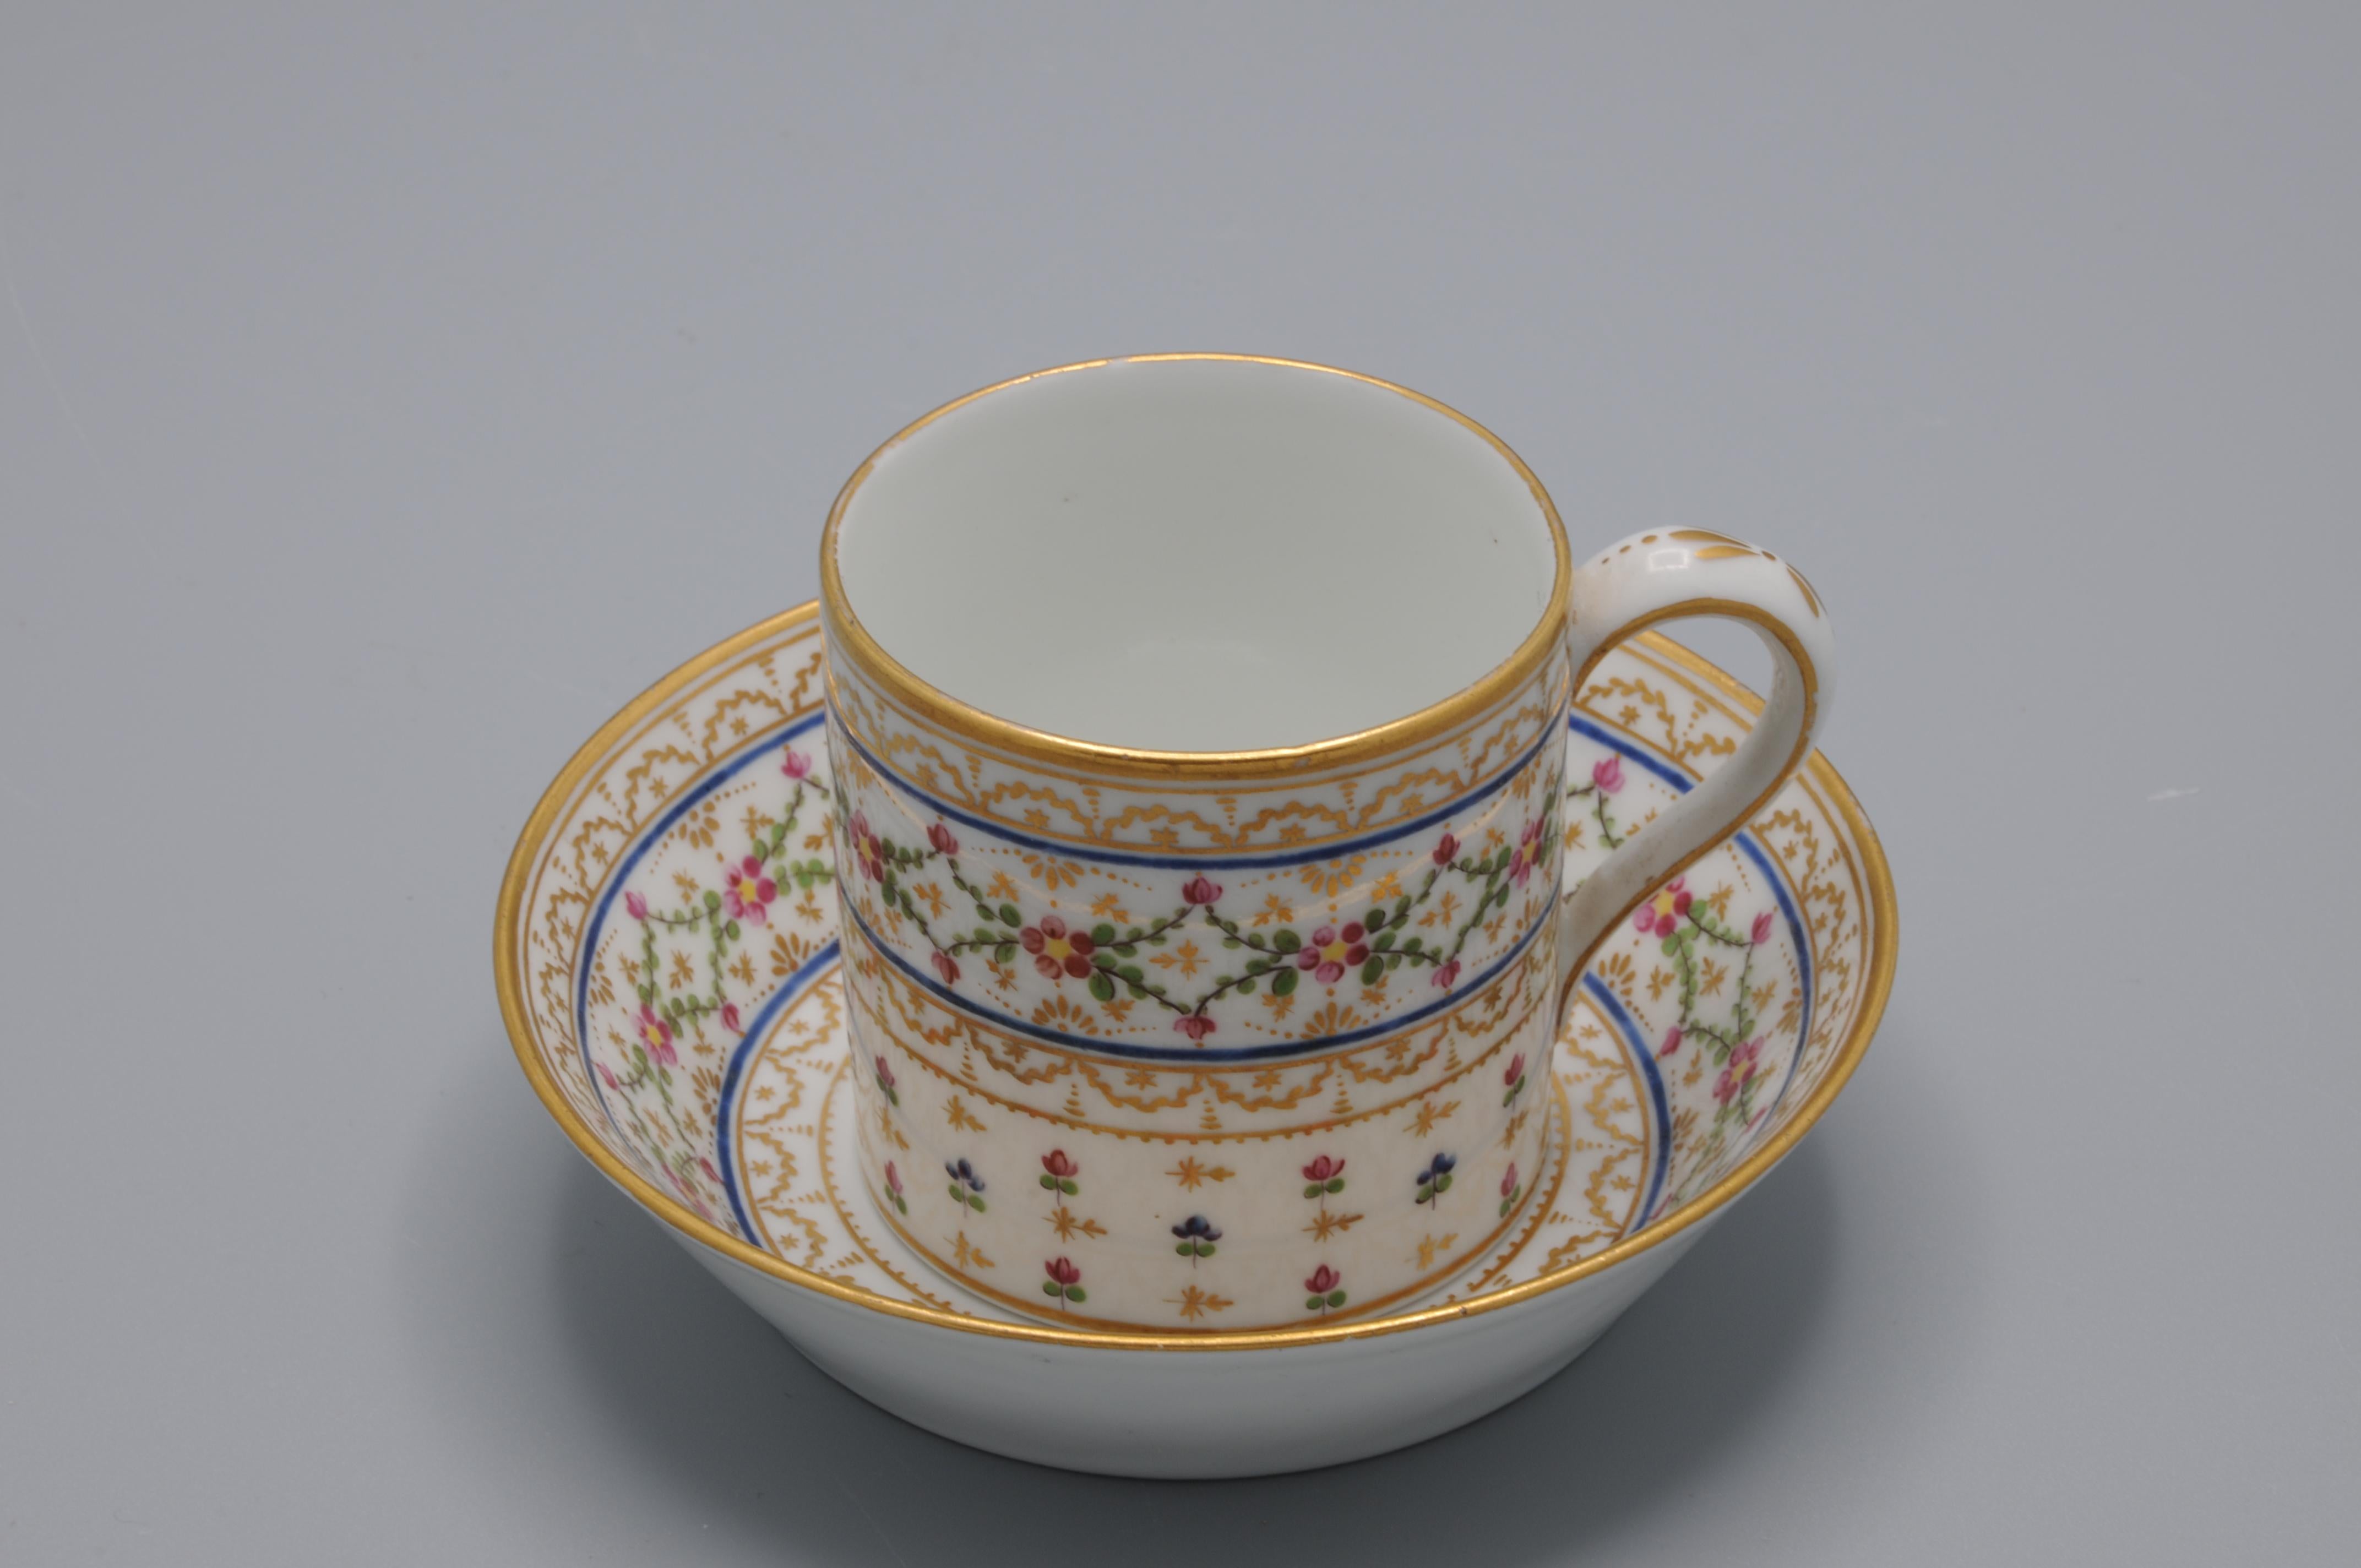 French André Leboeuf, Manufacture à la Reine' - Cup and saucer 'Litron', late 18th For Sale